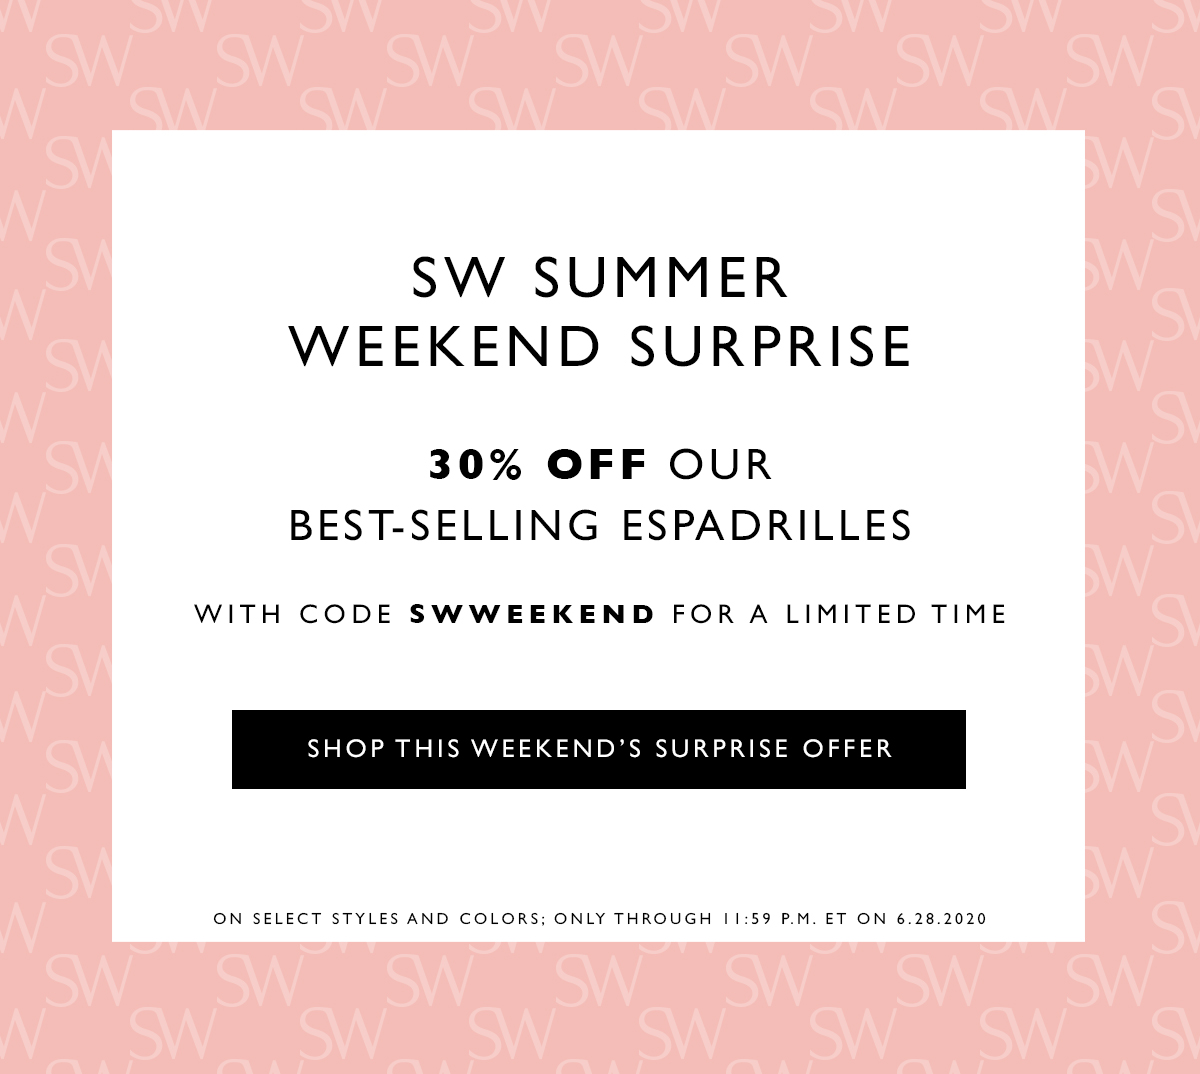  SW Summer Weekend Surprise
											30% off our best-selling espadrilles with code SWWEEKEND for a limited time. SHOP THIS WEEKEND’S SURPRISE OFFER